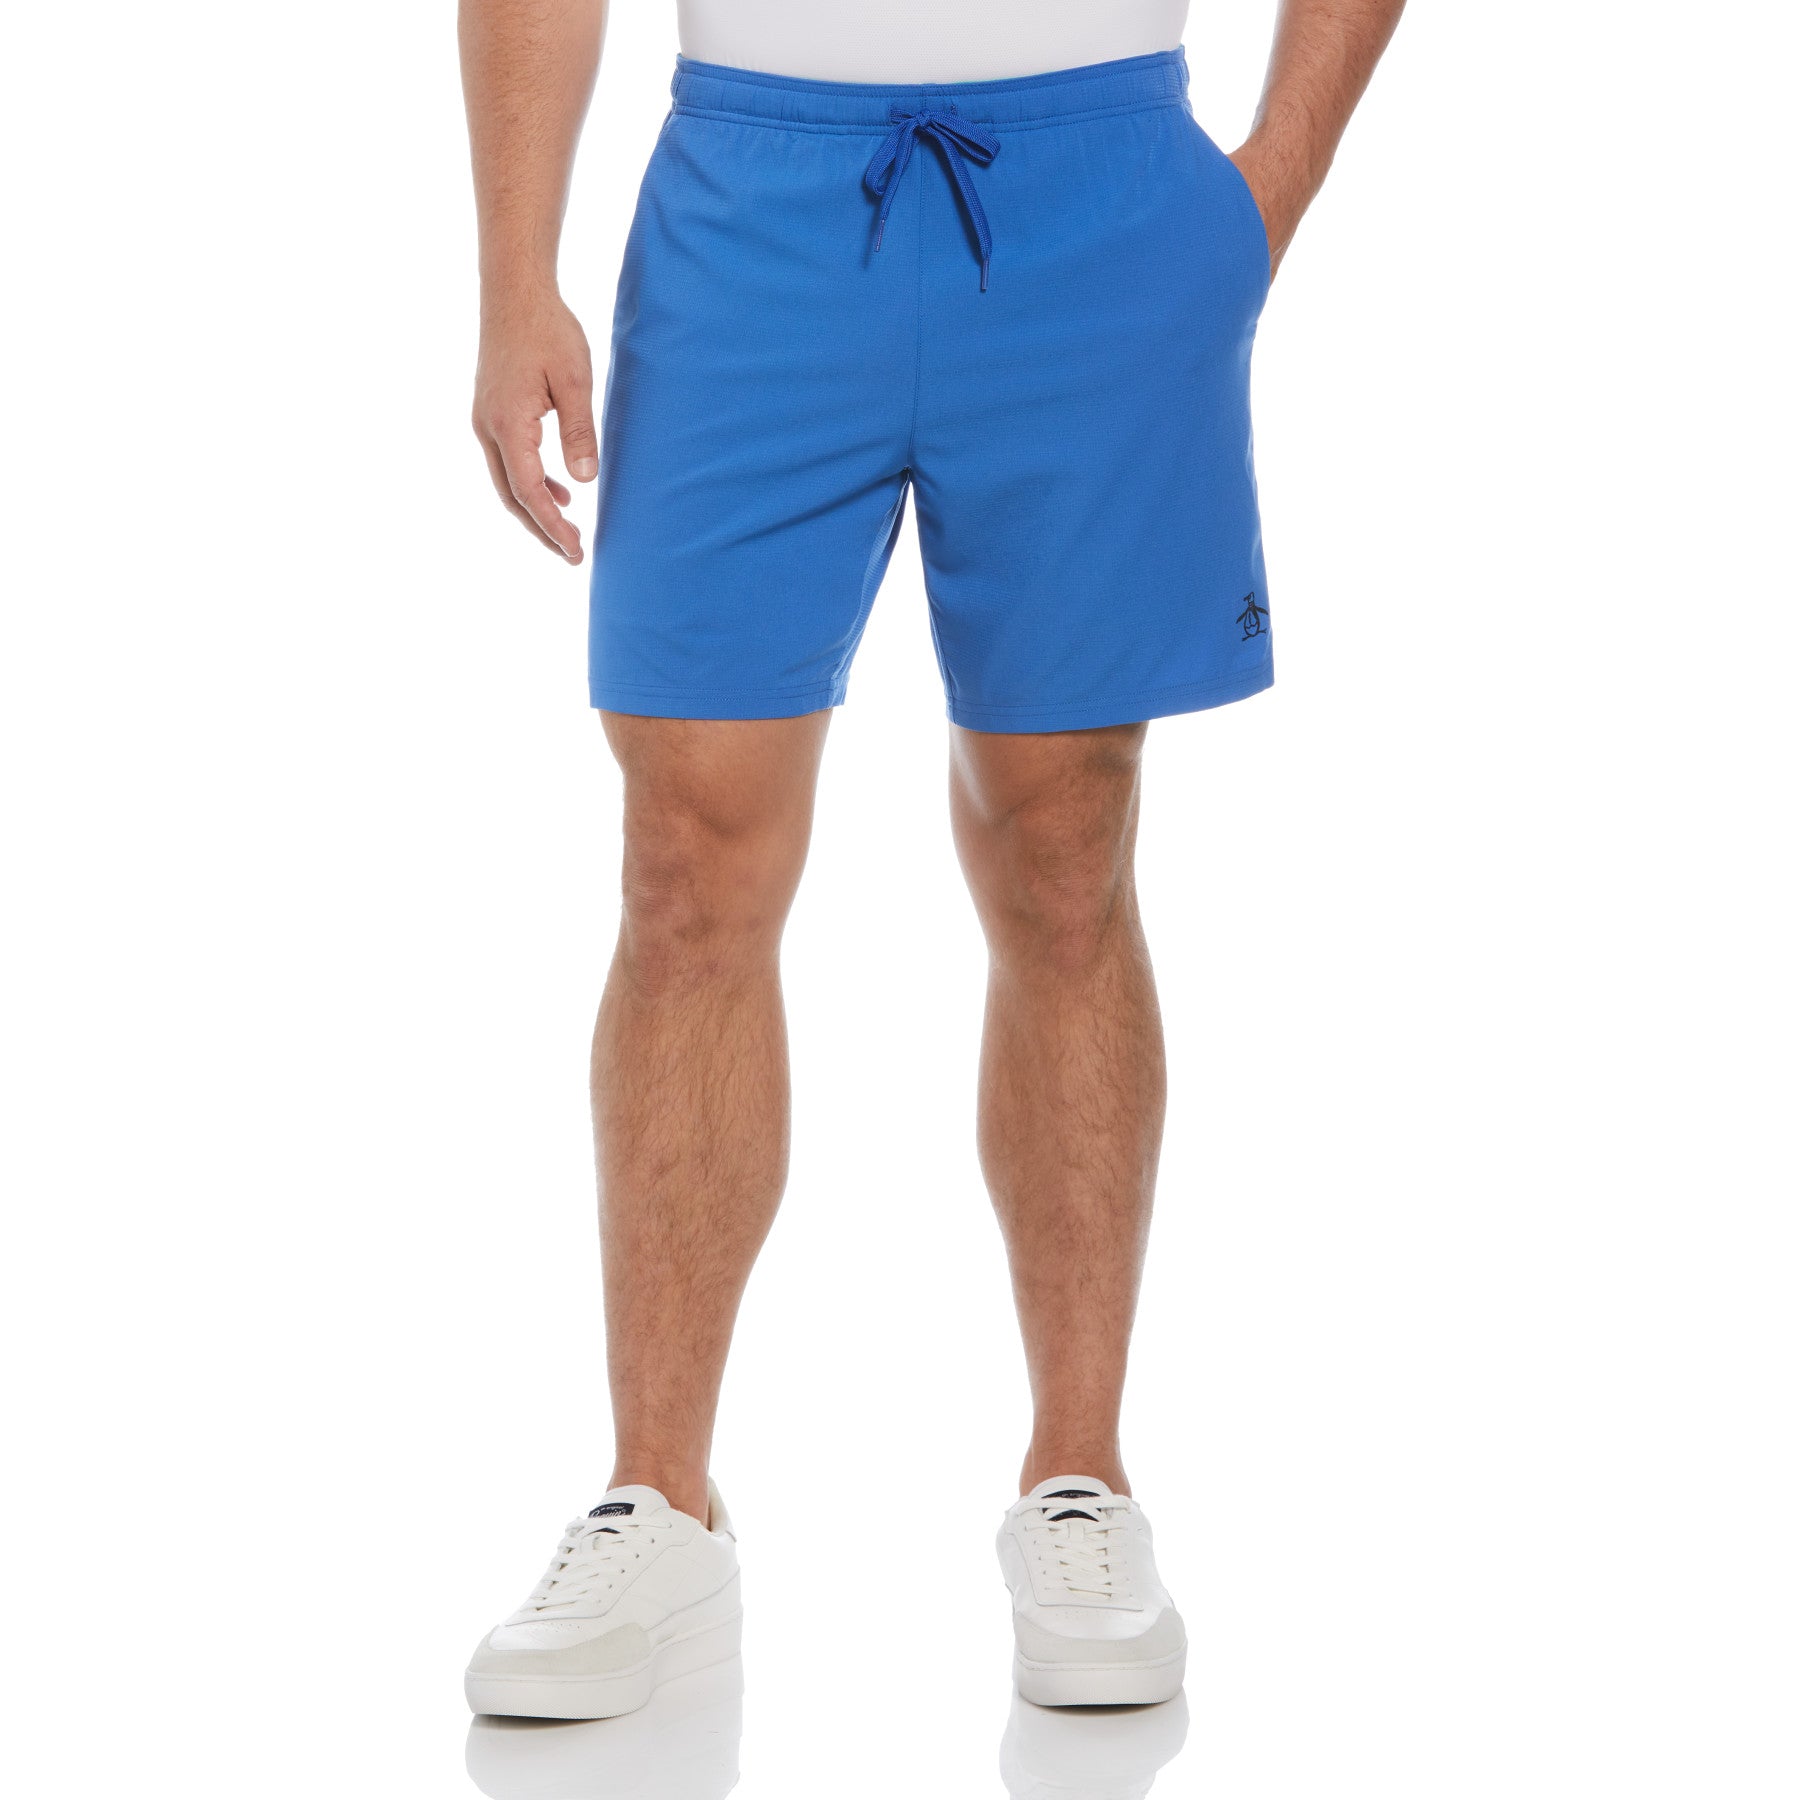 Tennis Performance 7" Inseam Shorts With Compression Lining In Nebulas